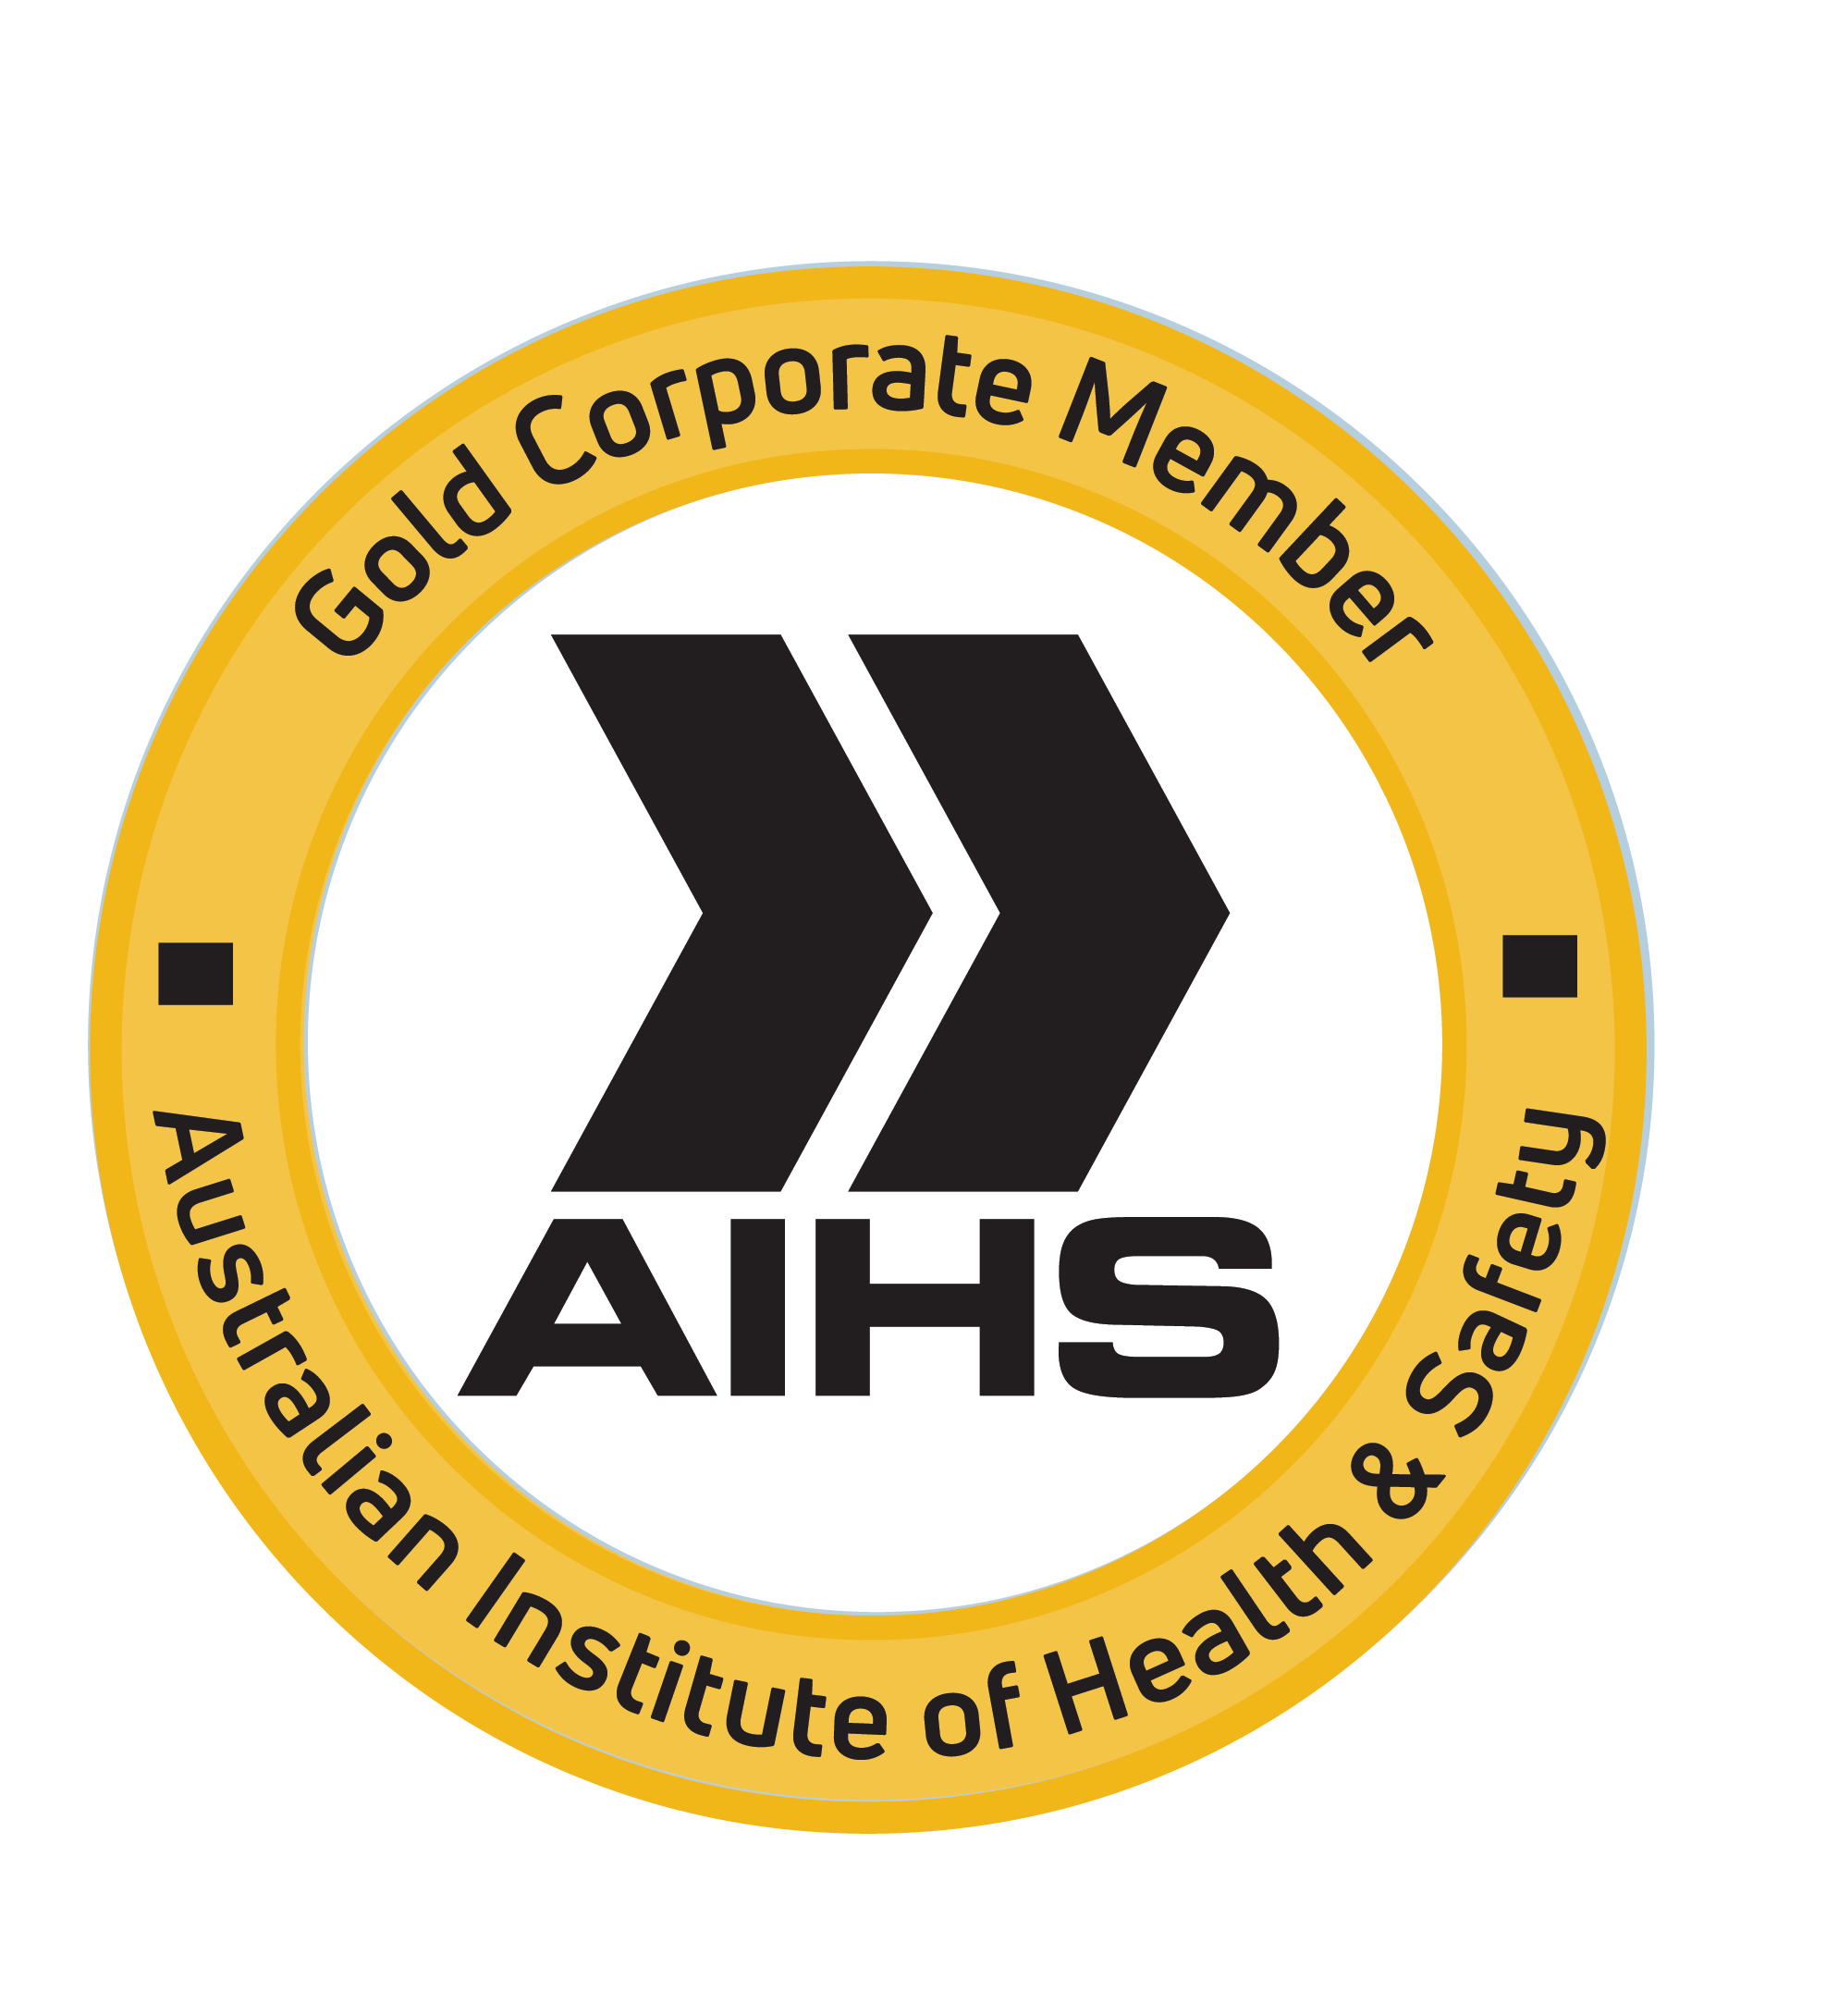 AIHS Gold Corporate Member - ICAM